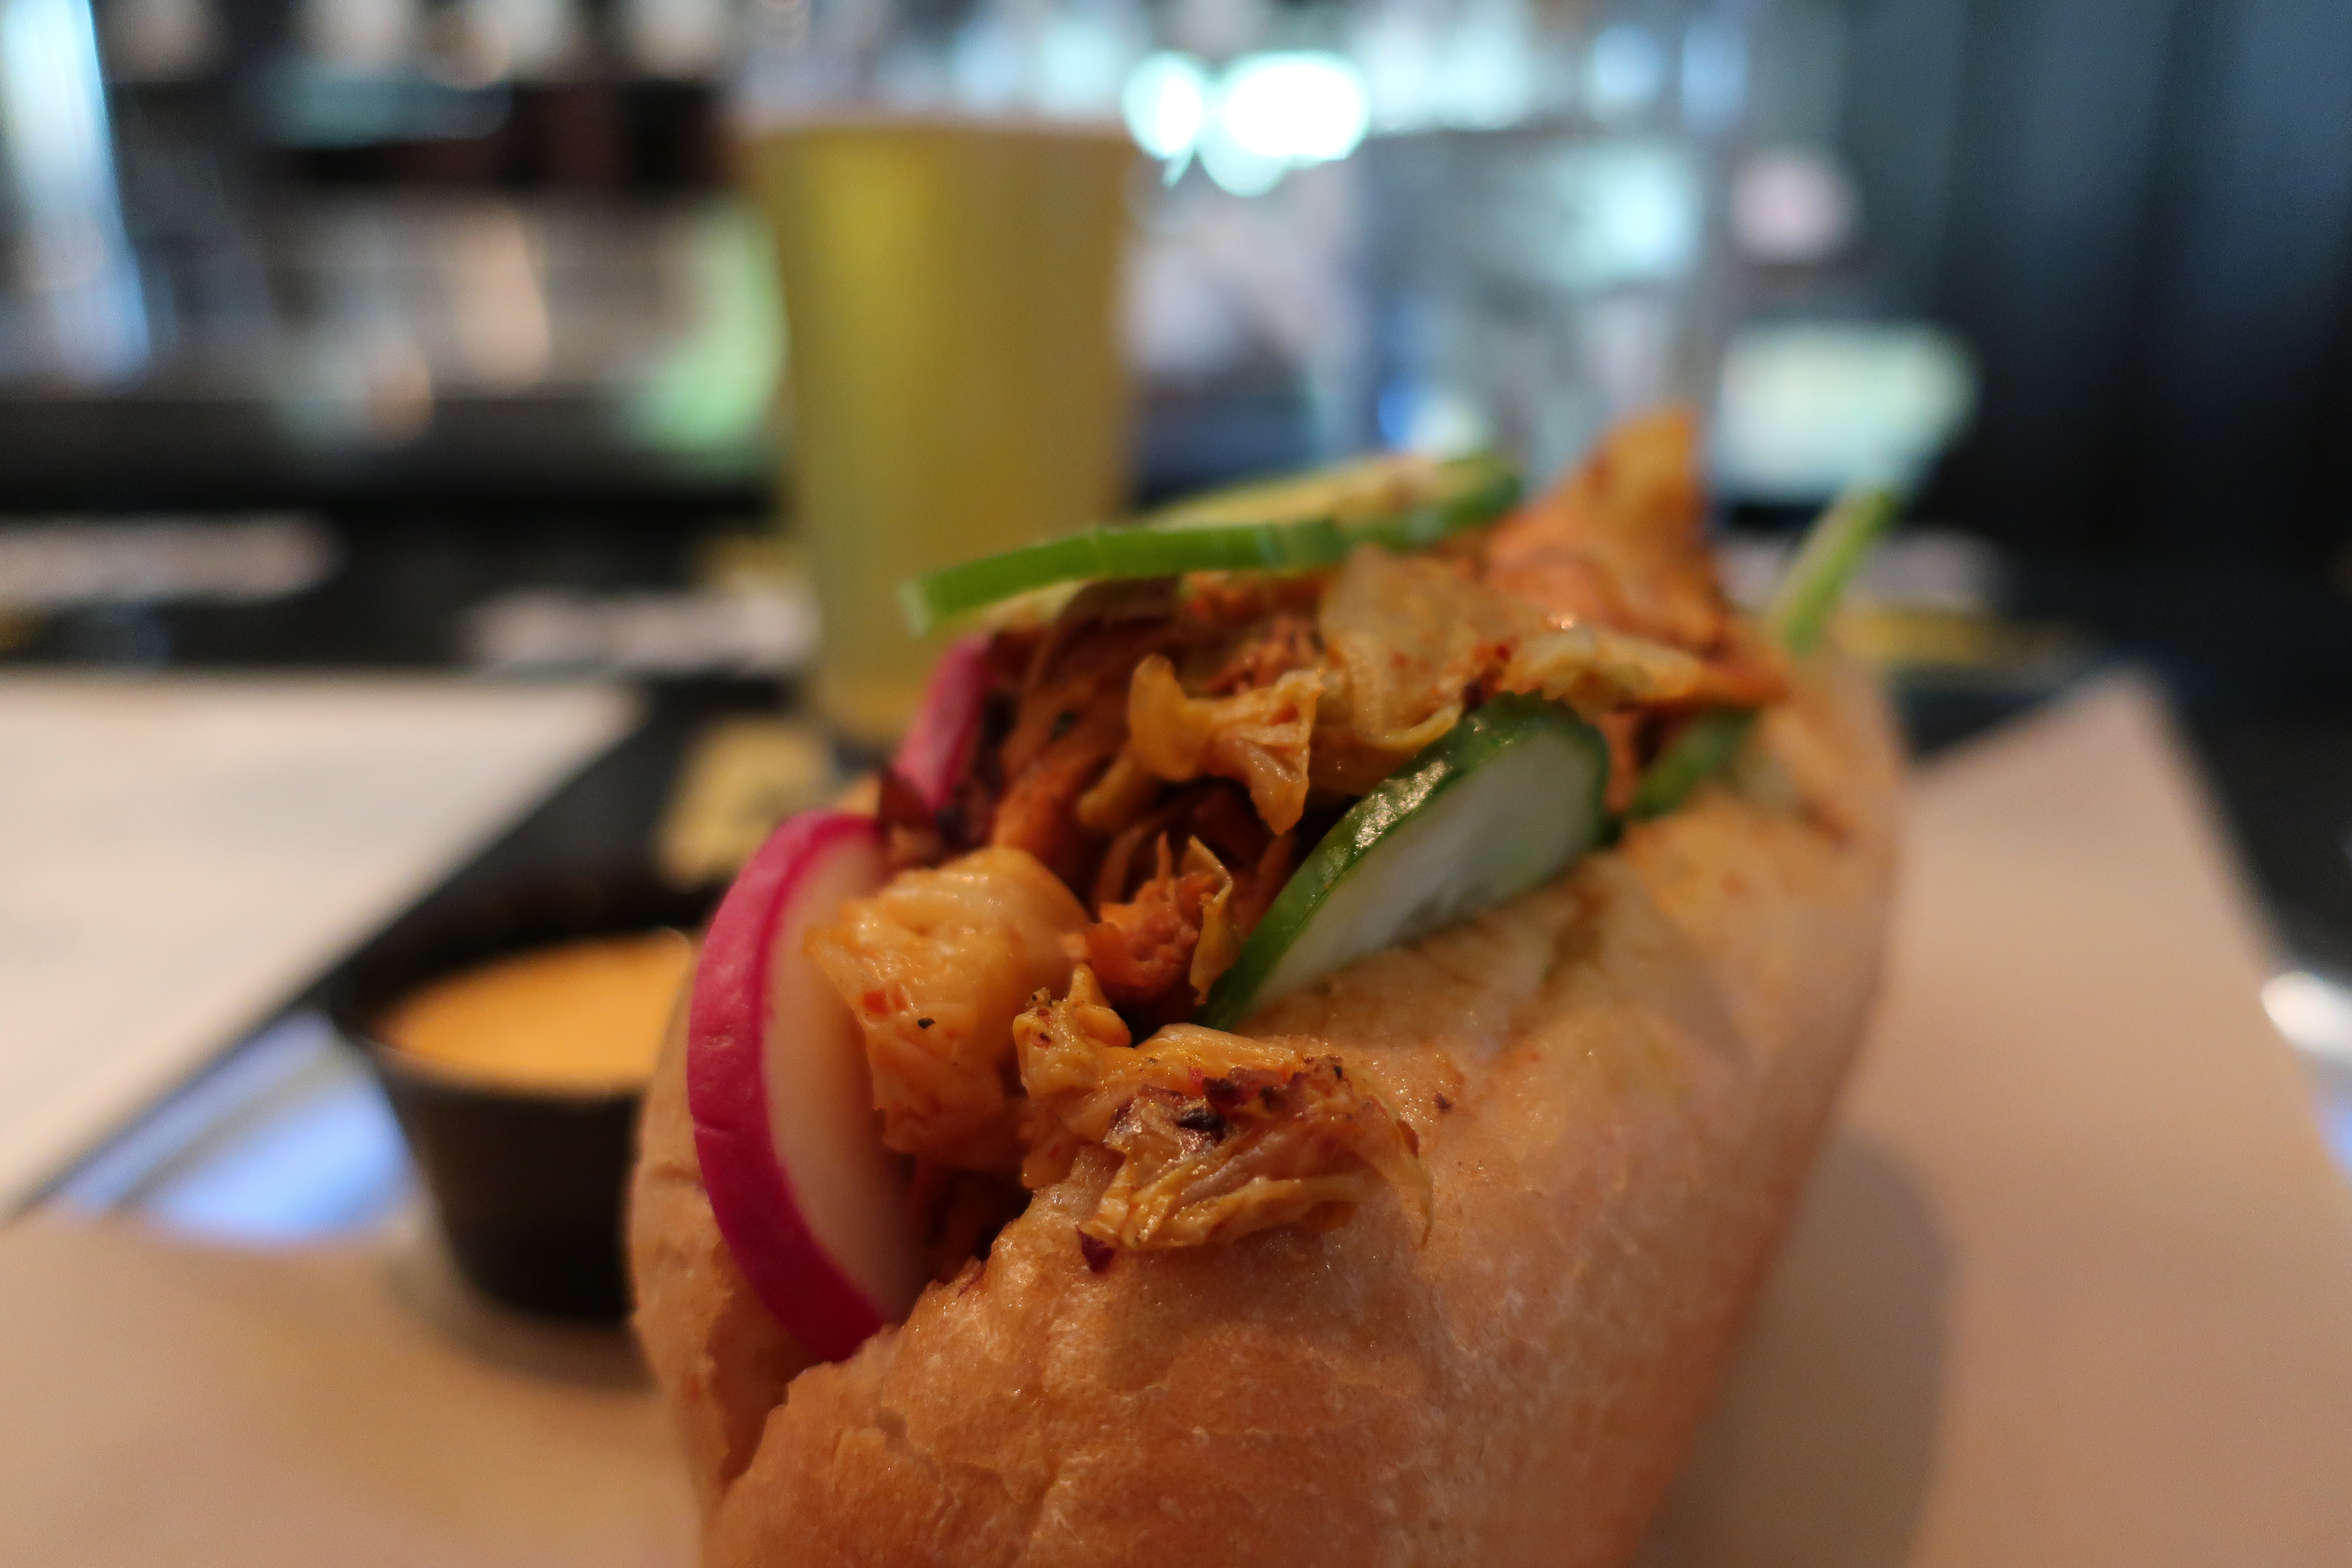 The Salmon Banh Mi served a la cart at Von Ebert Brewing – East.